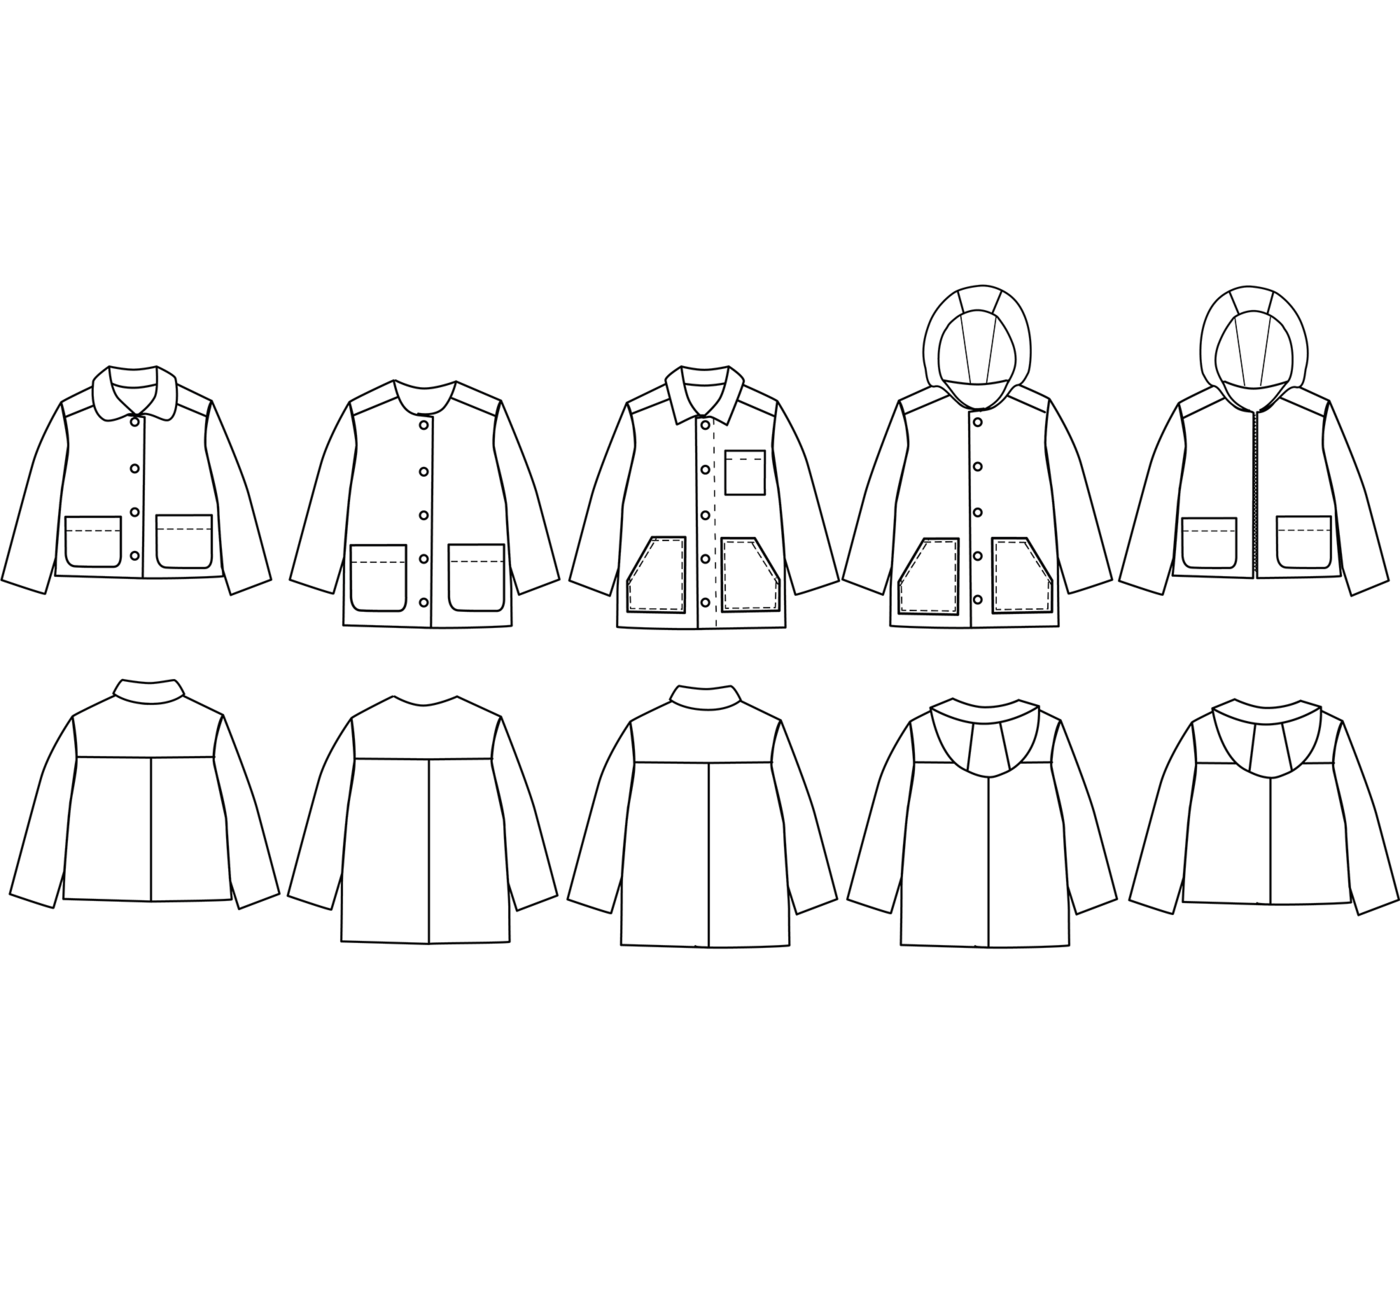 Ikatee - SAM - parka, jacket - Babies and Kids 6m/4y - Paper Sewing Pattern